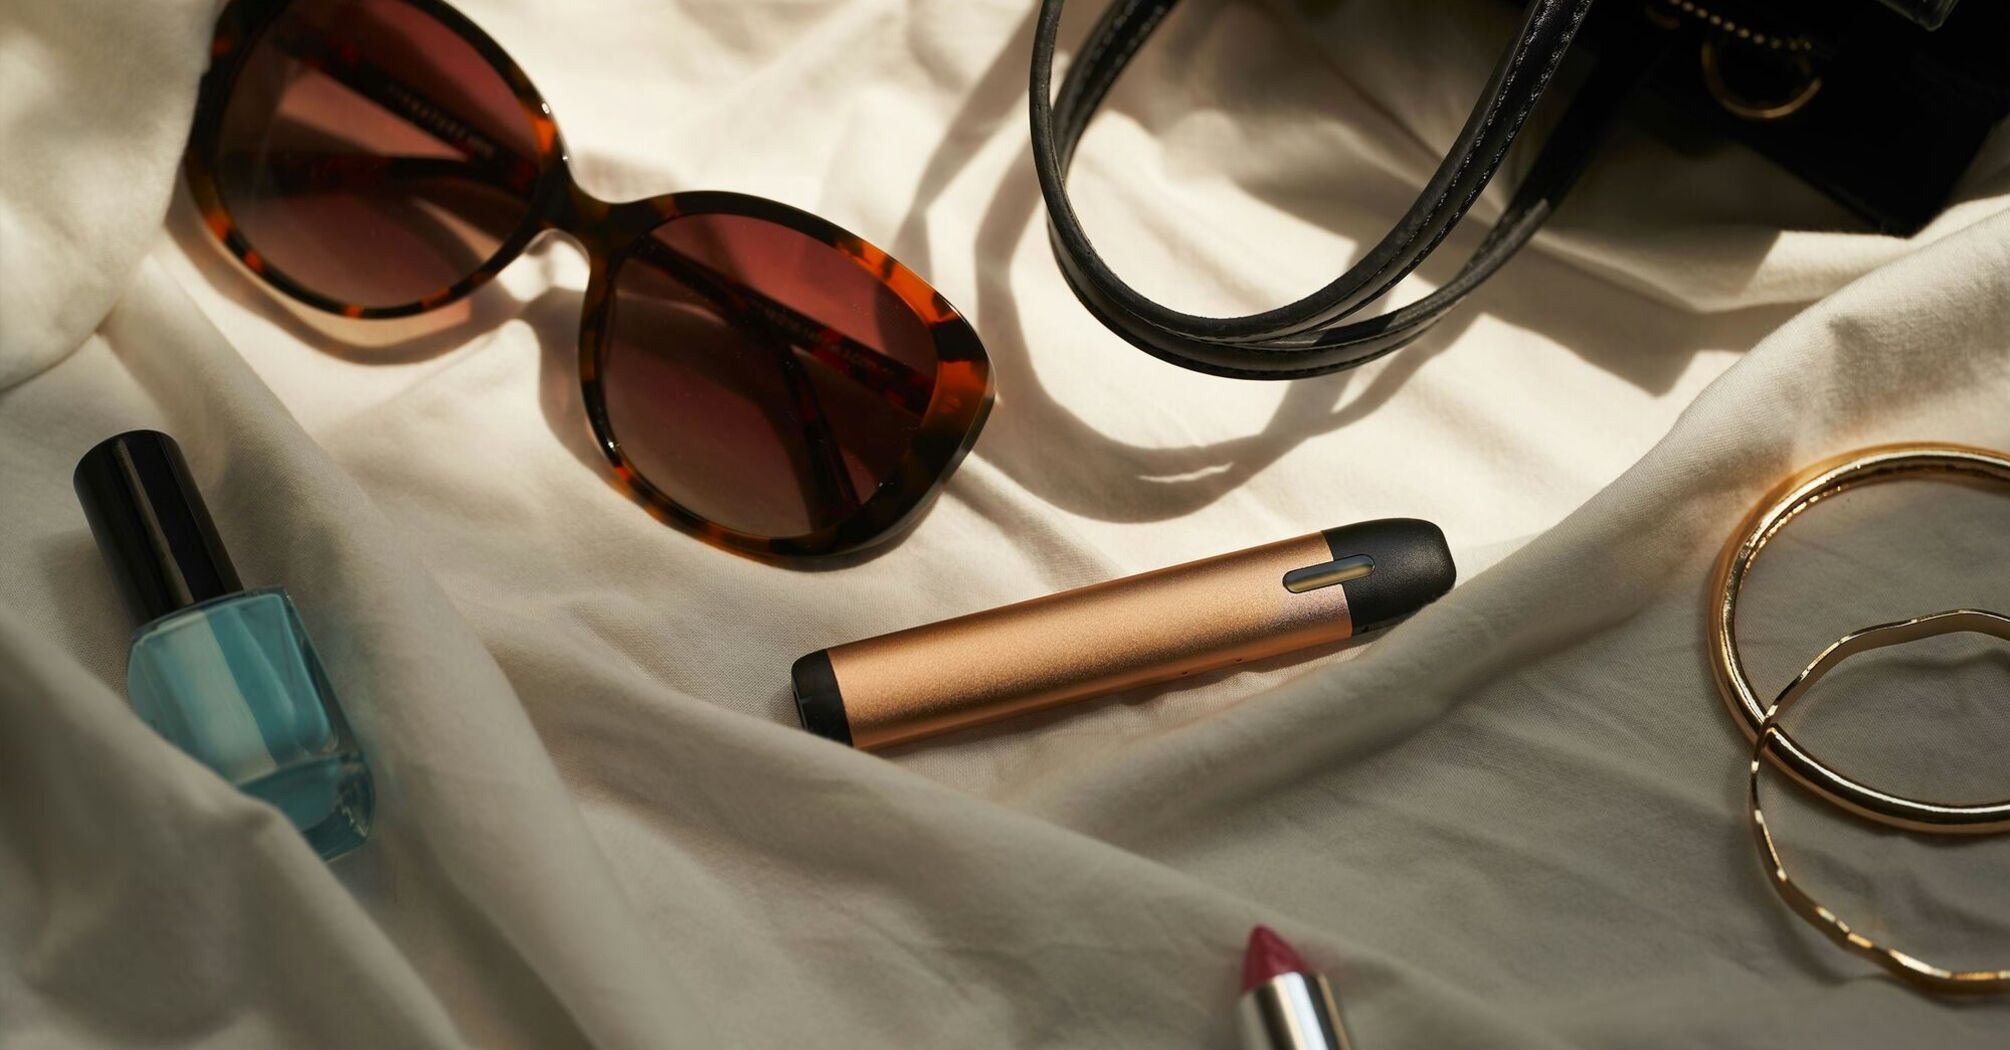 A flat lay of various personal items, including a pair of oversized sunglasses, a black handbag, a bottle of nail polish, a lipstick, and golden bangles